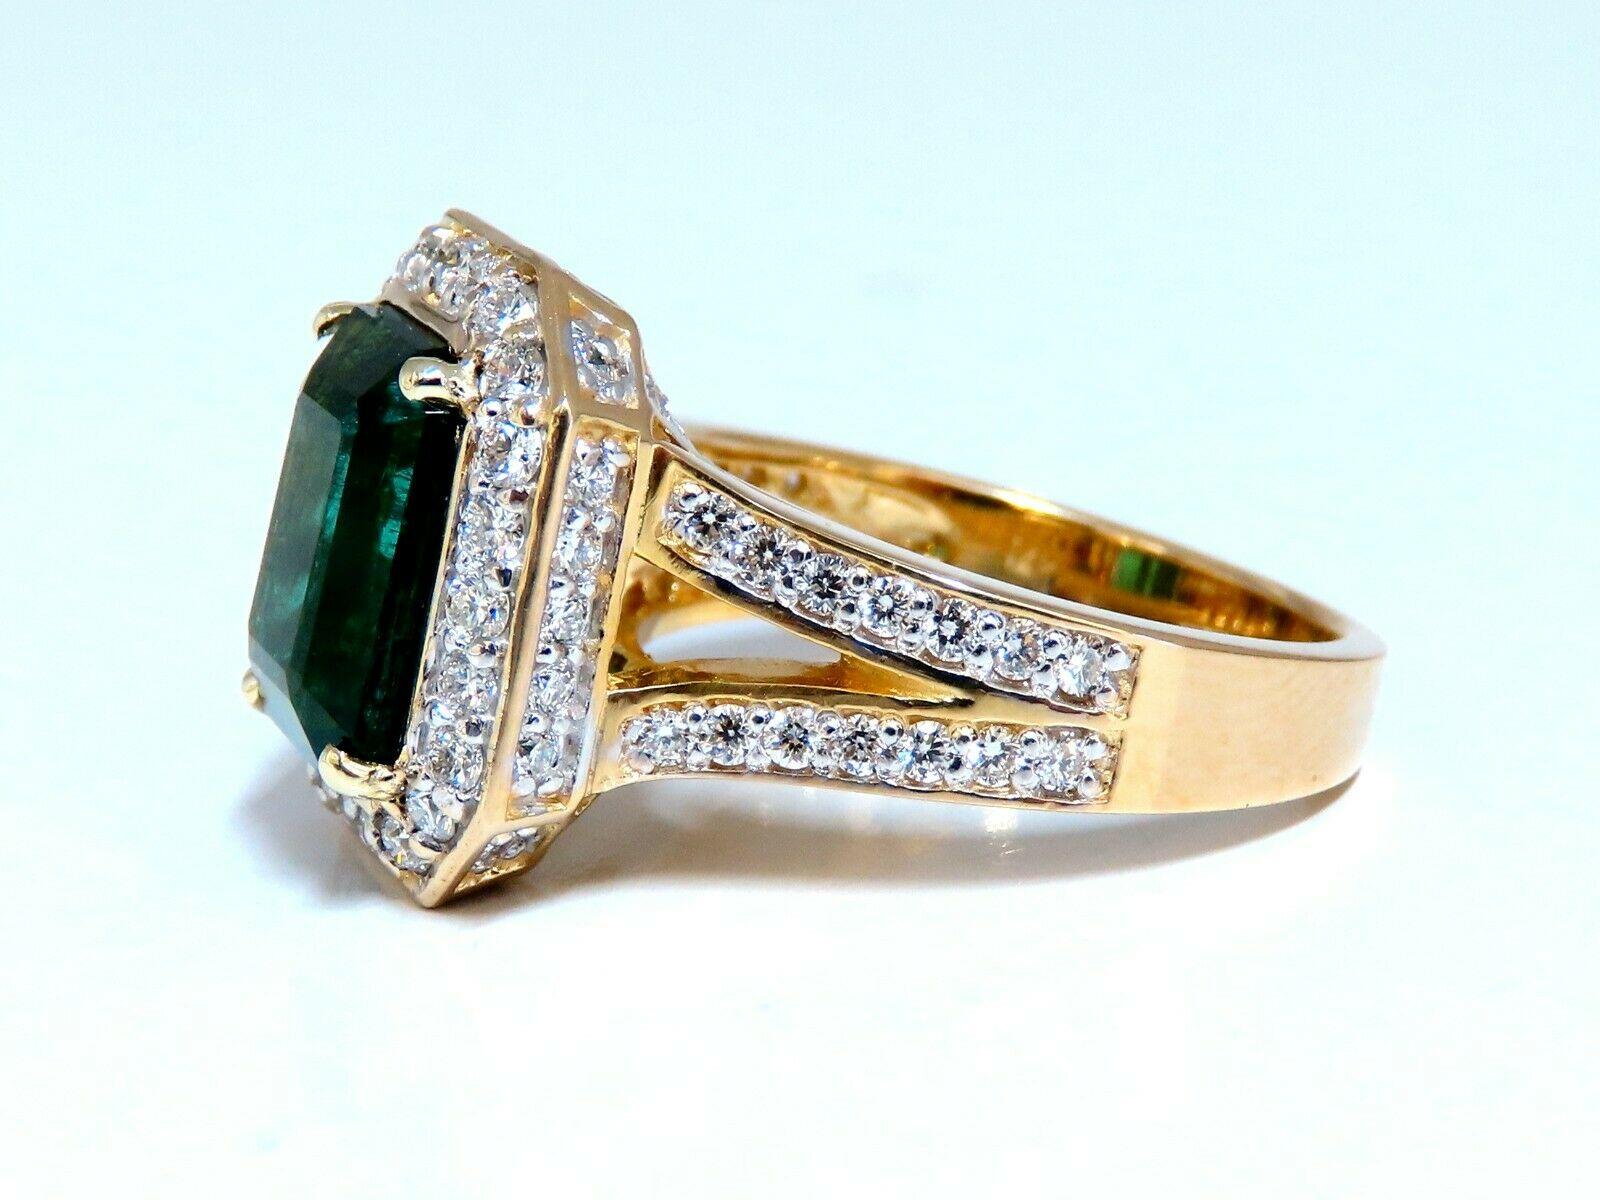 Classic Rectangular Deck Deco Green.

5.12ct. Natural Emerald cut, Emerald Ring

GIA Certified: #2354603111

10.93 x 9.02 x 6.41mm

Transparent, Green (F1)

1.20ct. Diamonds.

Round & full cuts 

G-color Vs-2 clarity.  

14kt. yellow gold

8.9